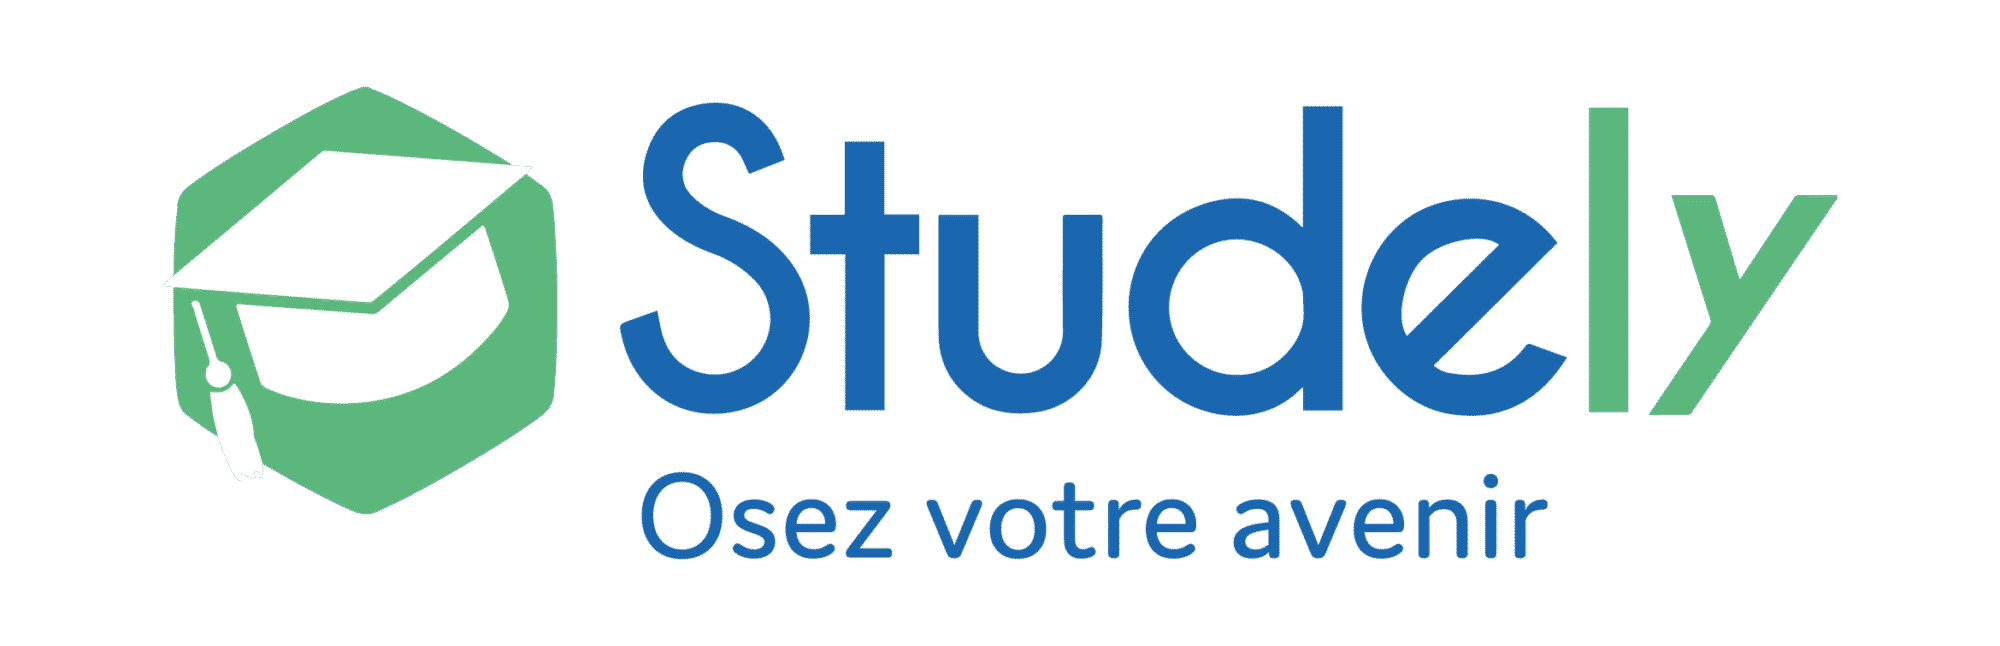 image Studely, offers 100% digital service to help students study in France